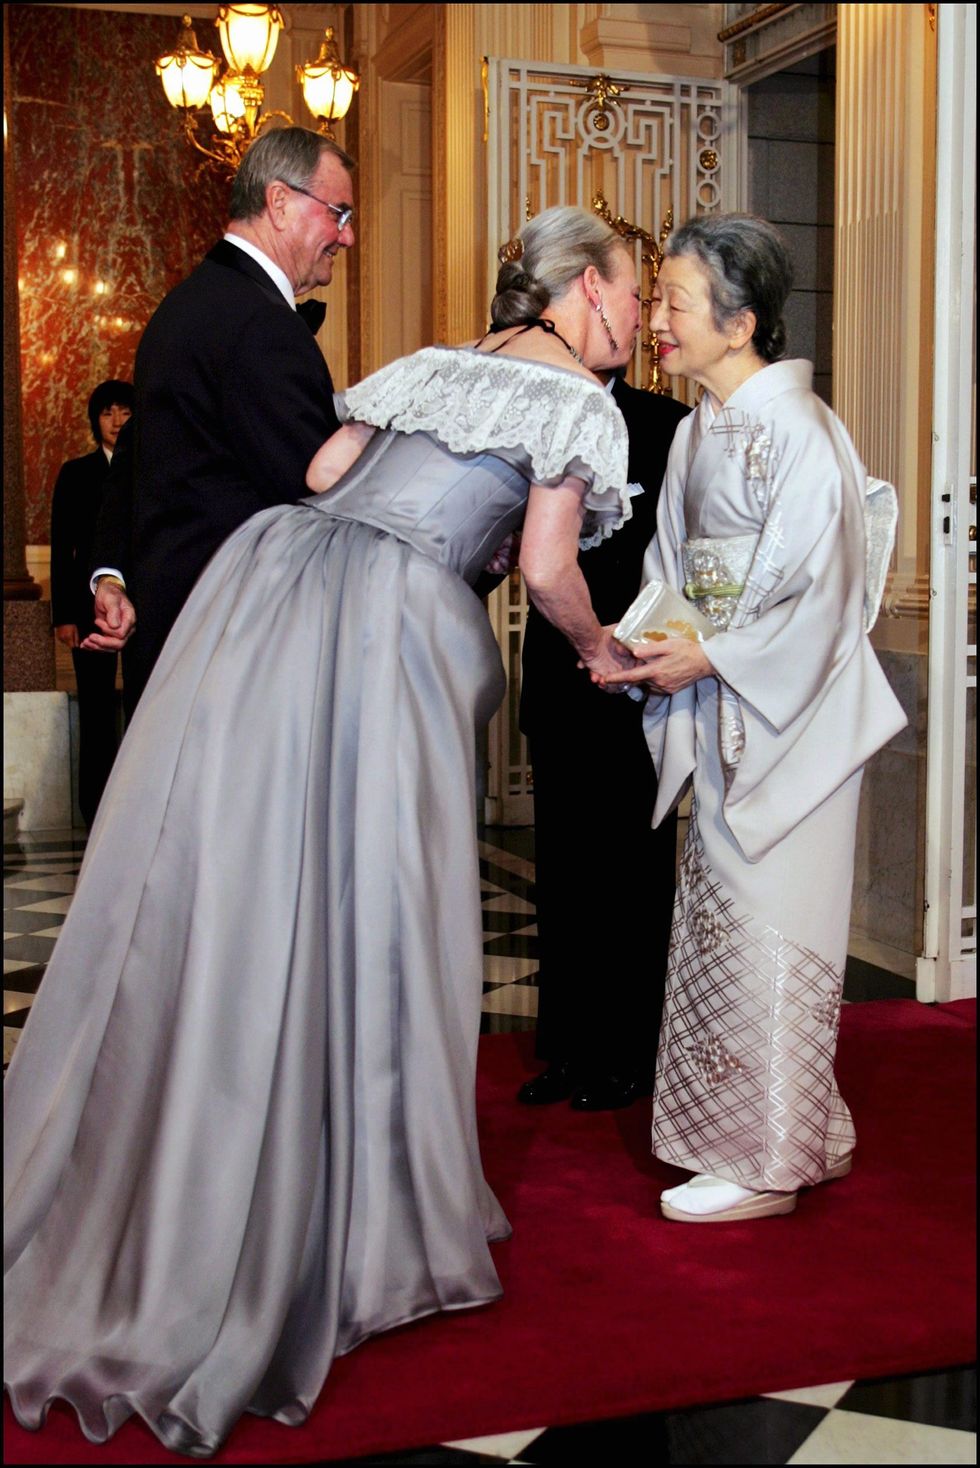 Denmark'S Queen Margrethe And Prince Consort Henrik Welcome Emperor Akihito And Empress At Return Reception In Tokyo, Japan On November 17, 2004.